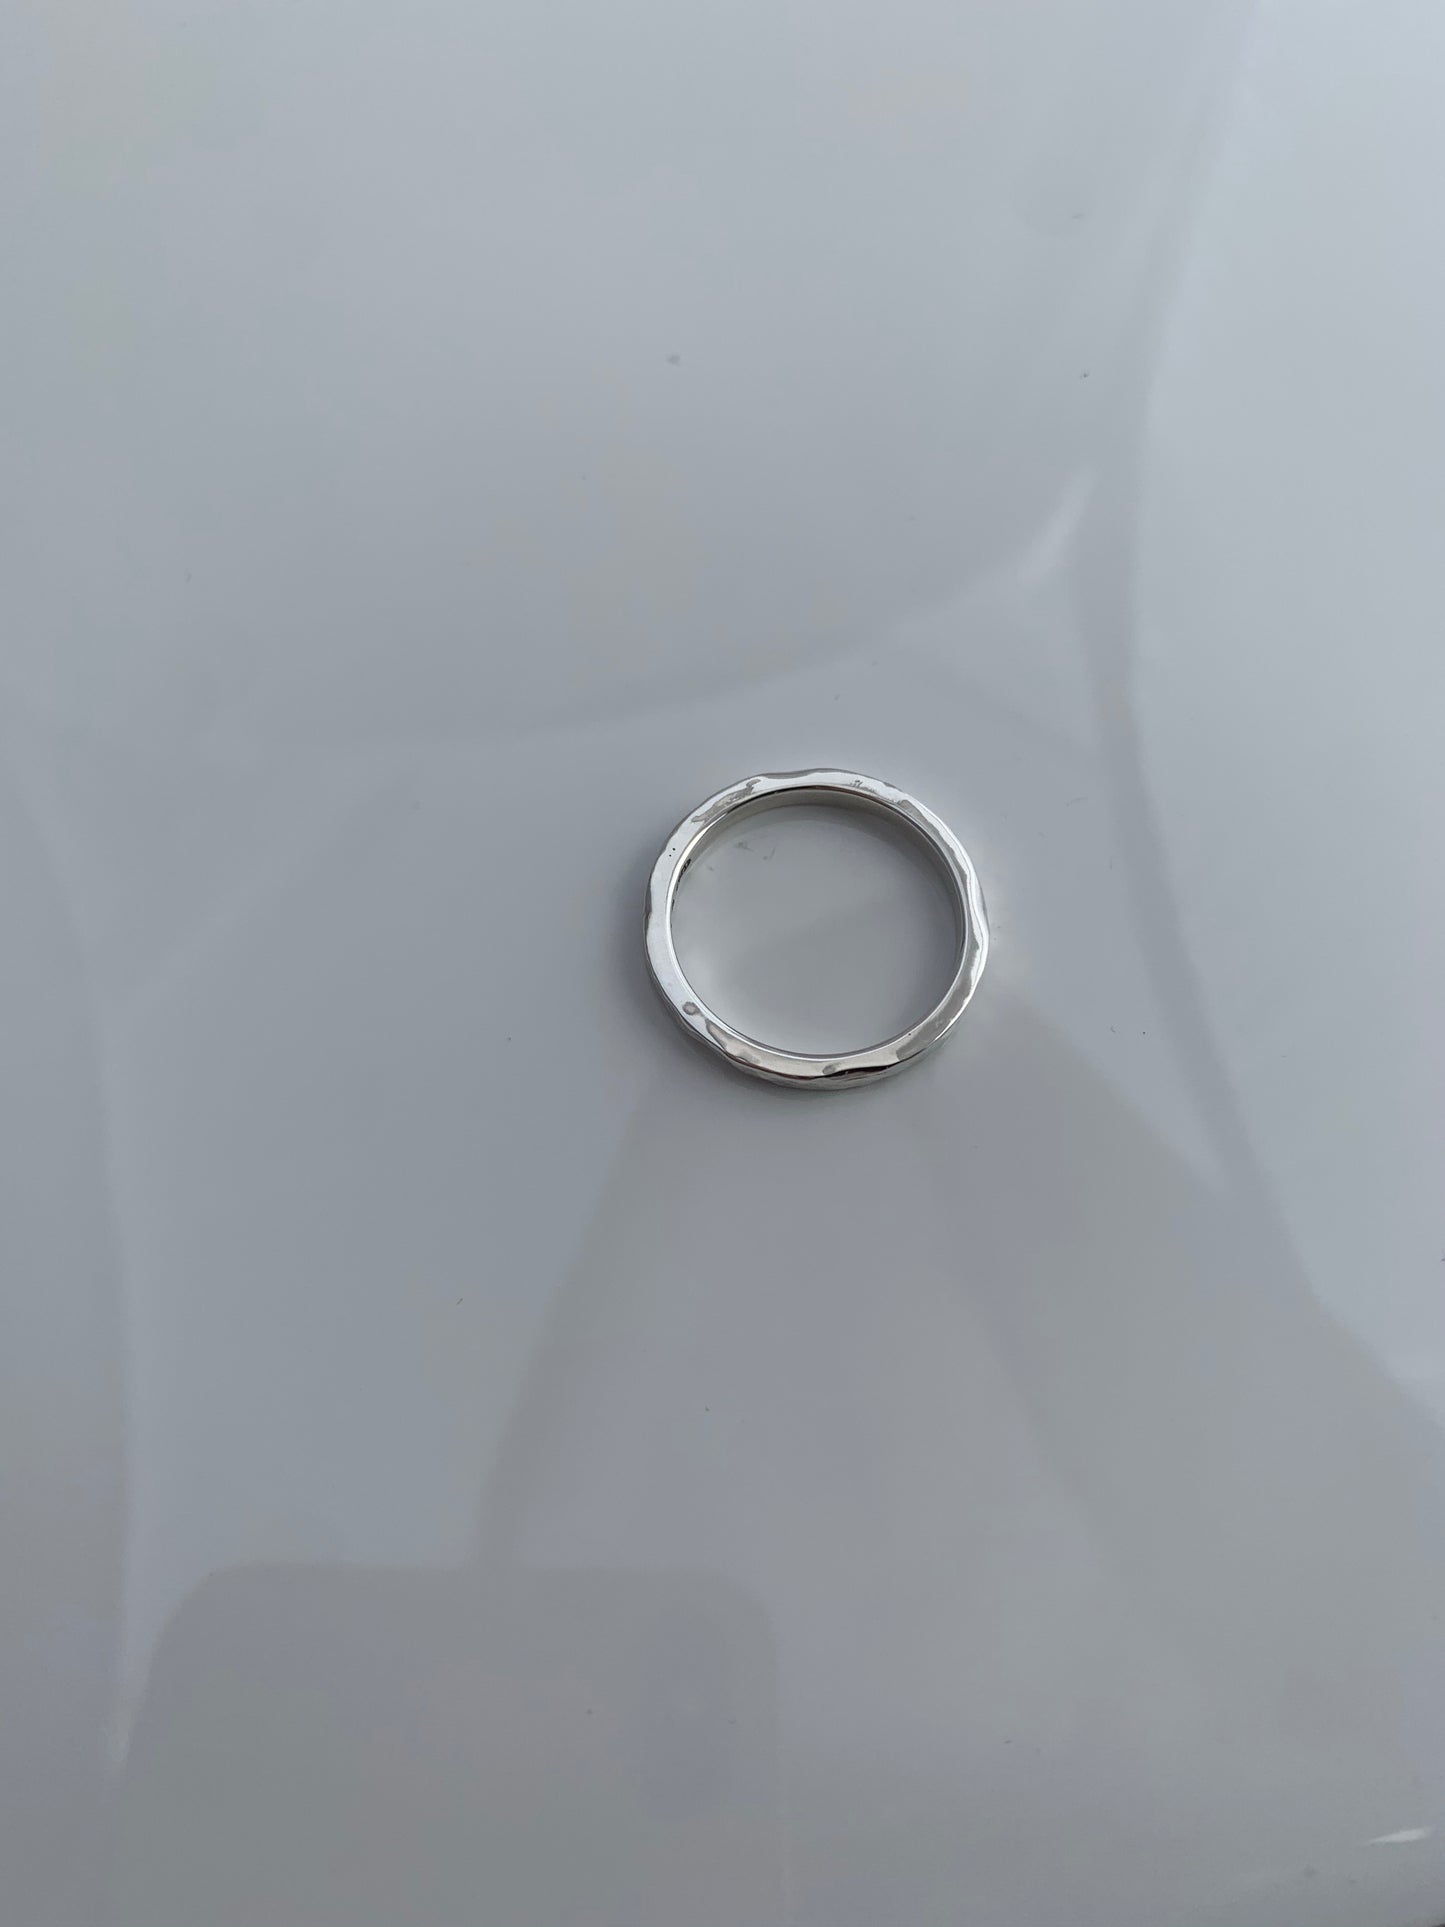 The "Formless' Ring